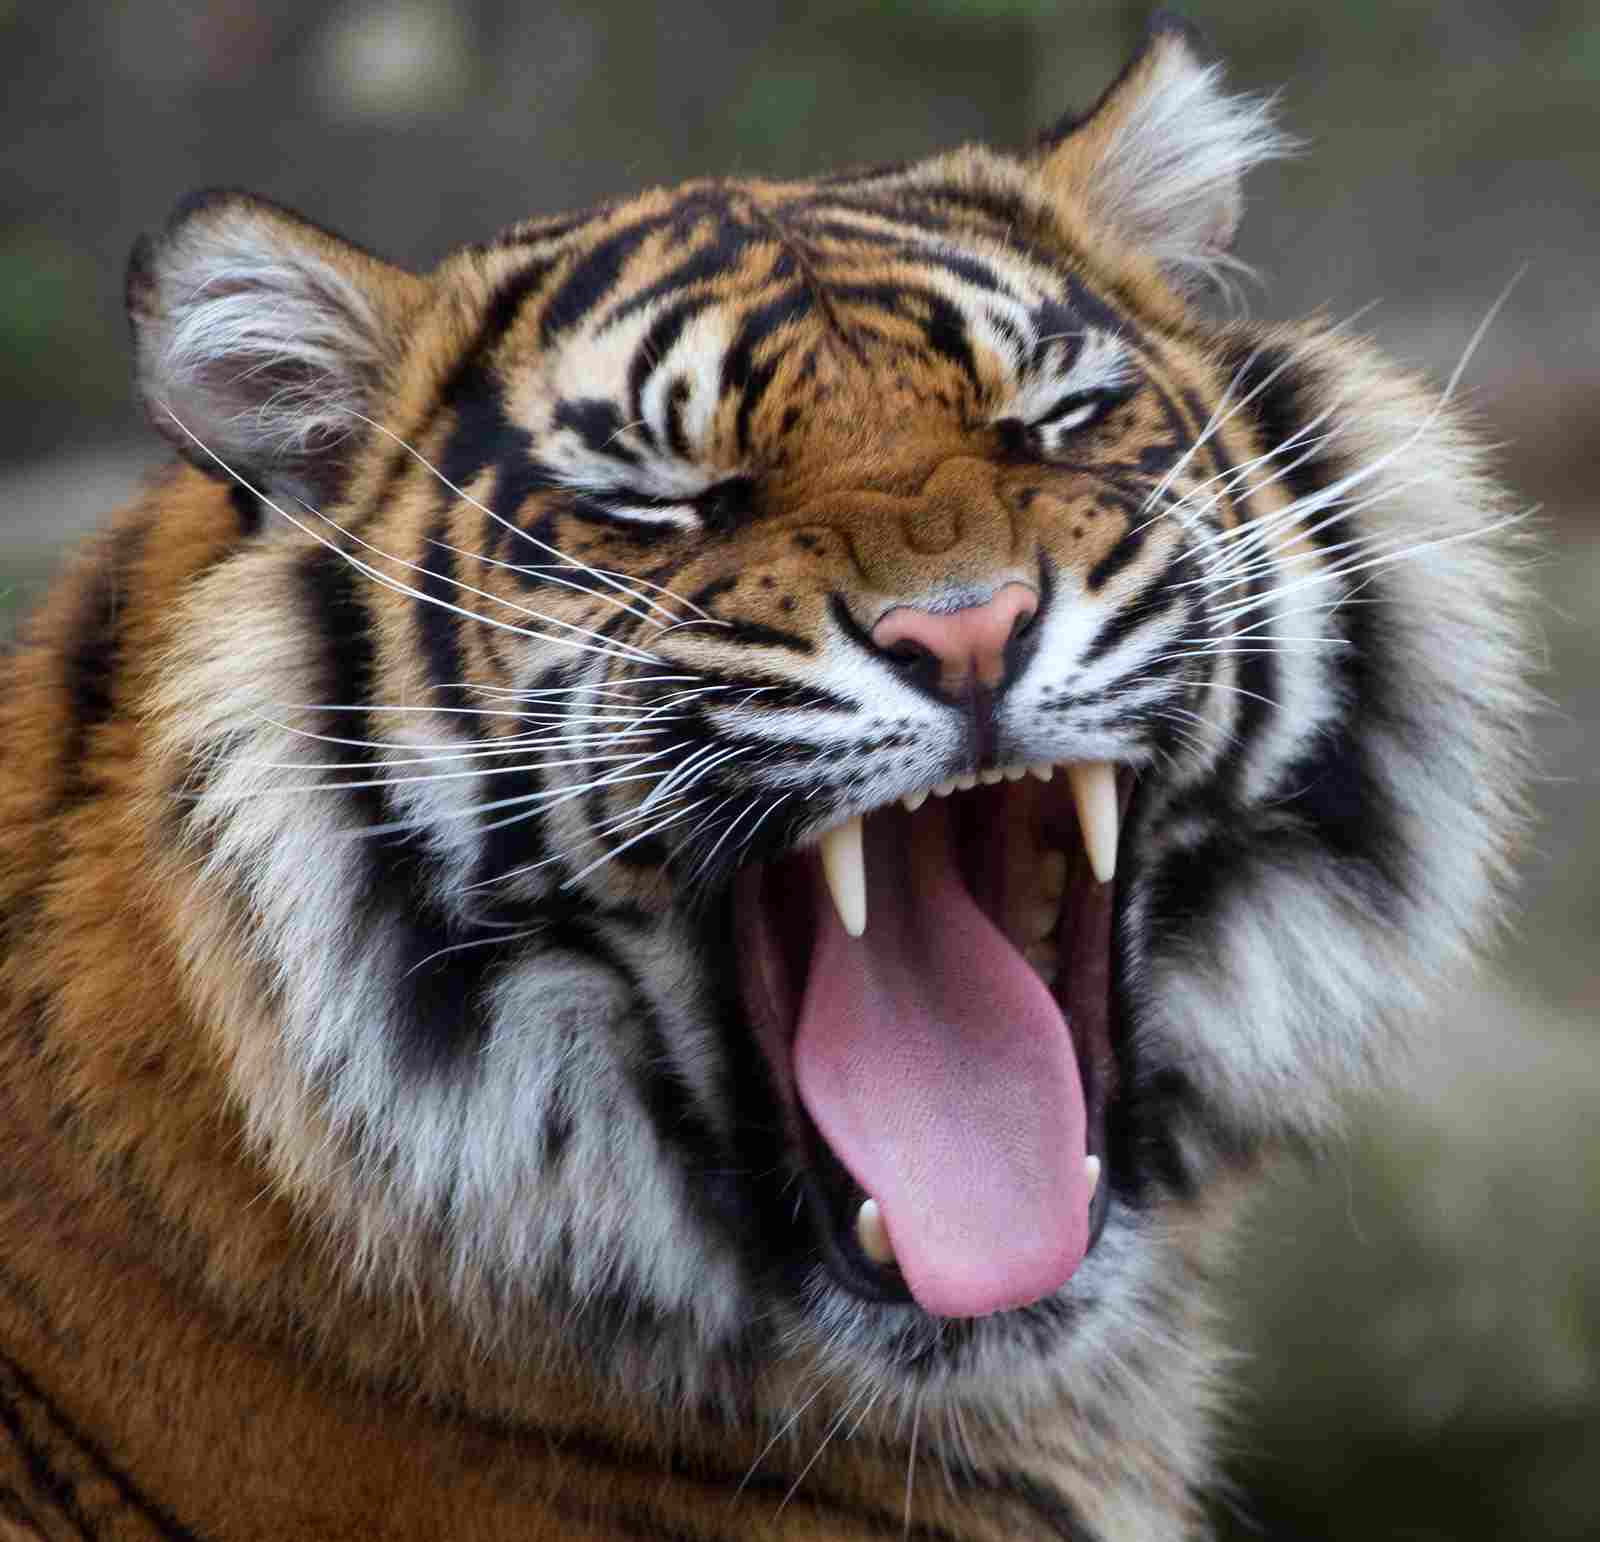 Wolf Vs Tiger: Documentations of Tiger Attacks On Humans Prove That They Can be Dangerous (Credit: Tony Hisgett 2012 .CC BY 2.0.)